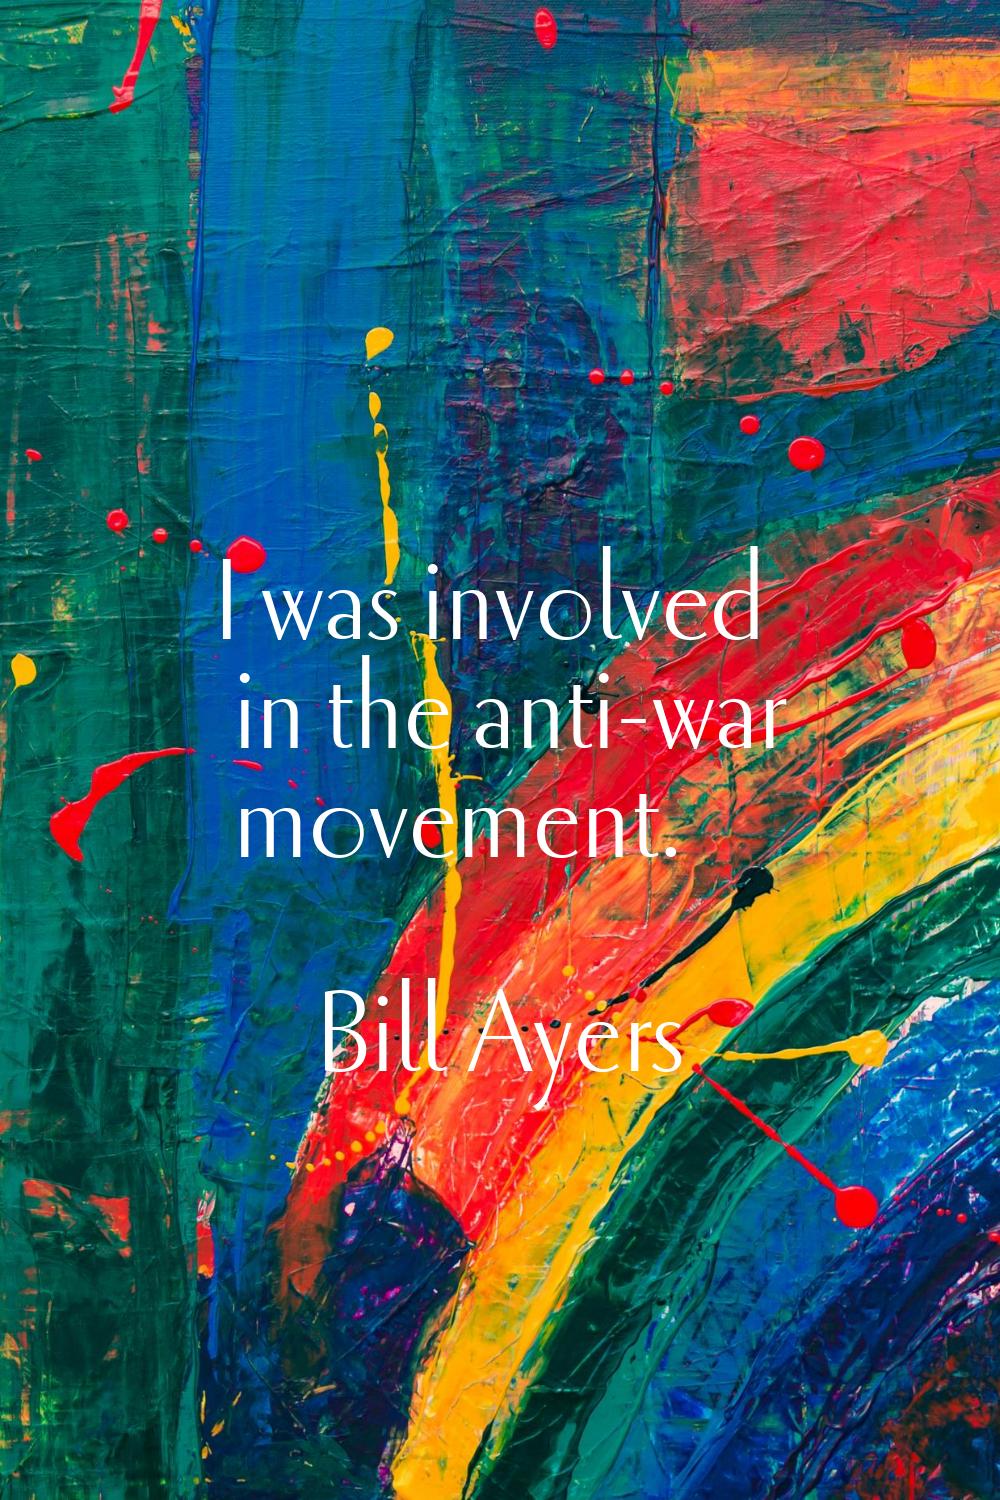 I was involved in the anti-war movement.